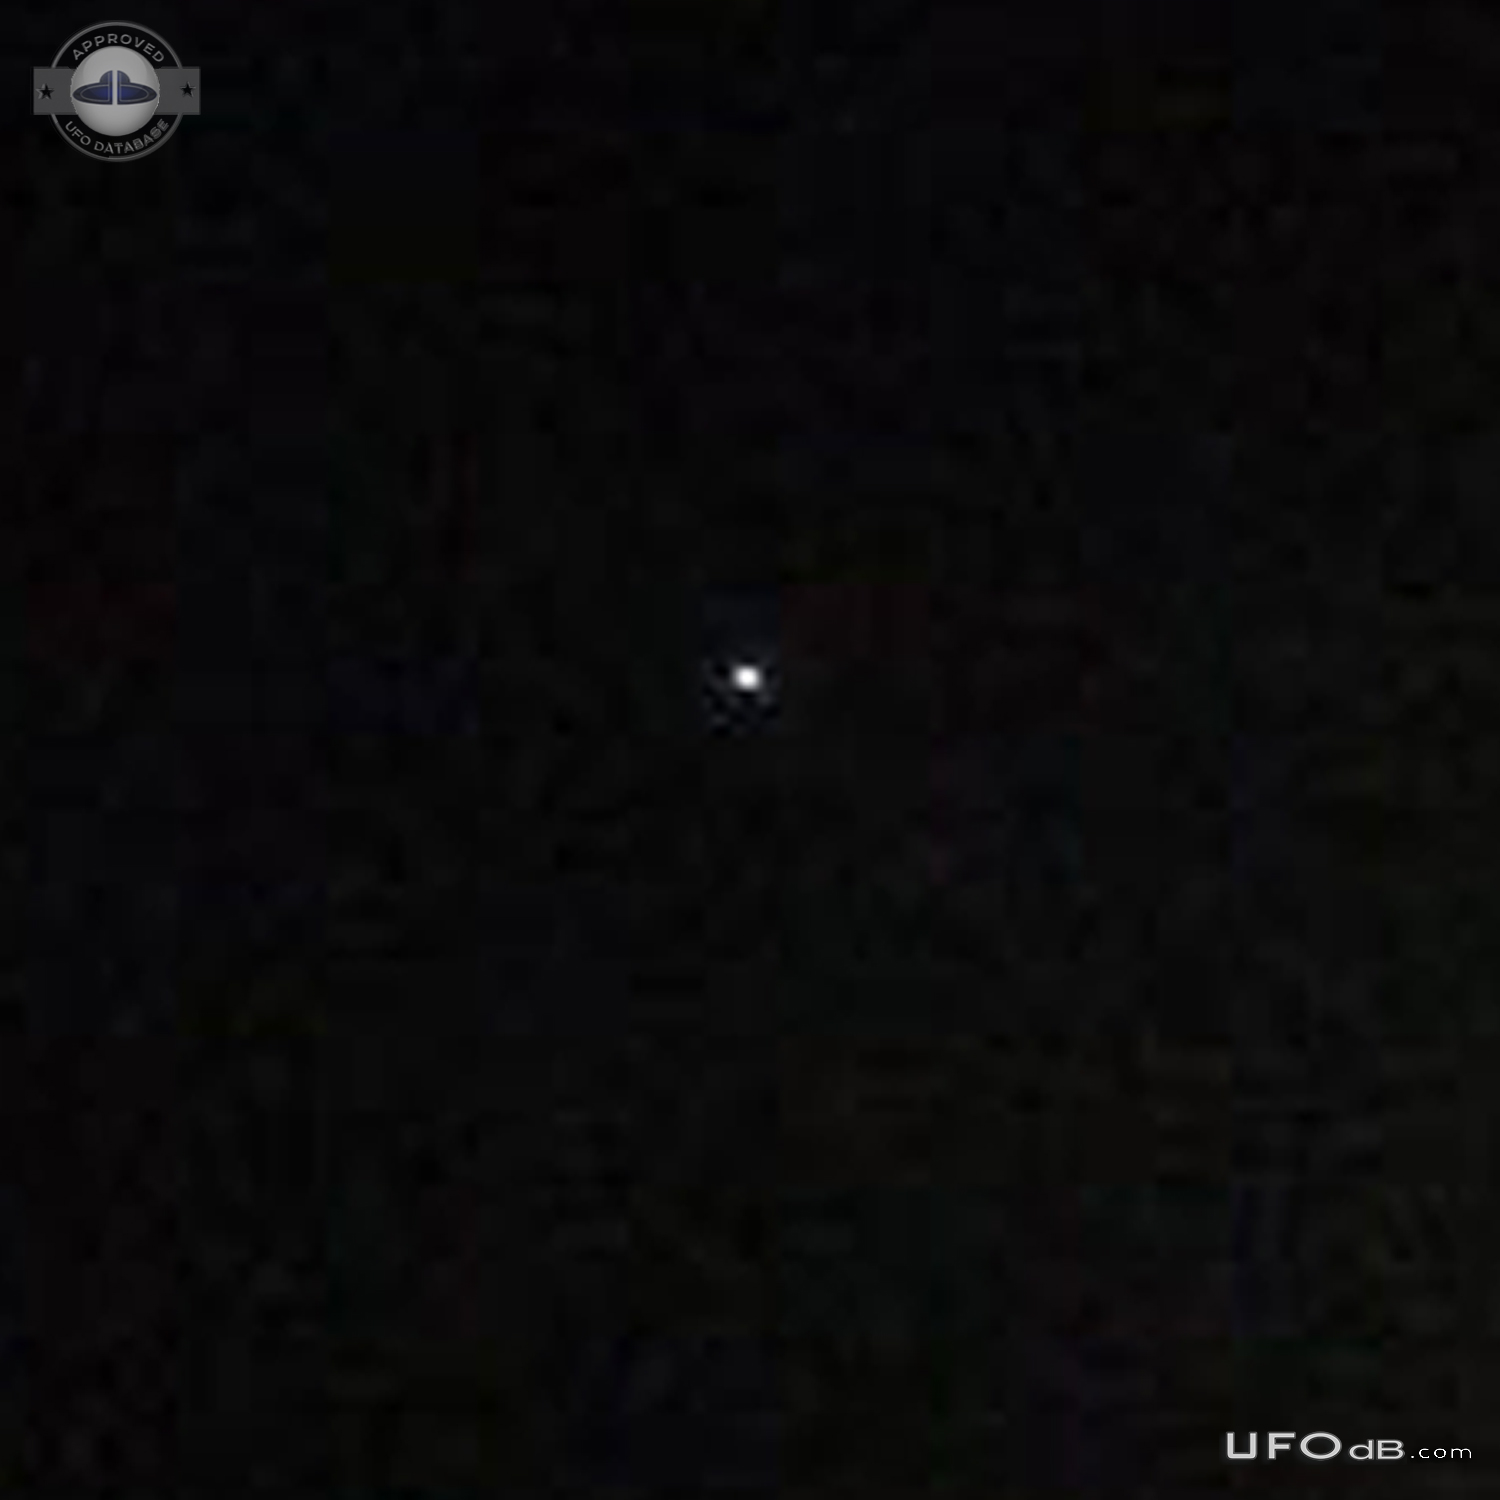 Flashing Star Like UFO seen over Montreal Quebec Canada 2016 UFO Picture #787-4